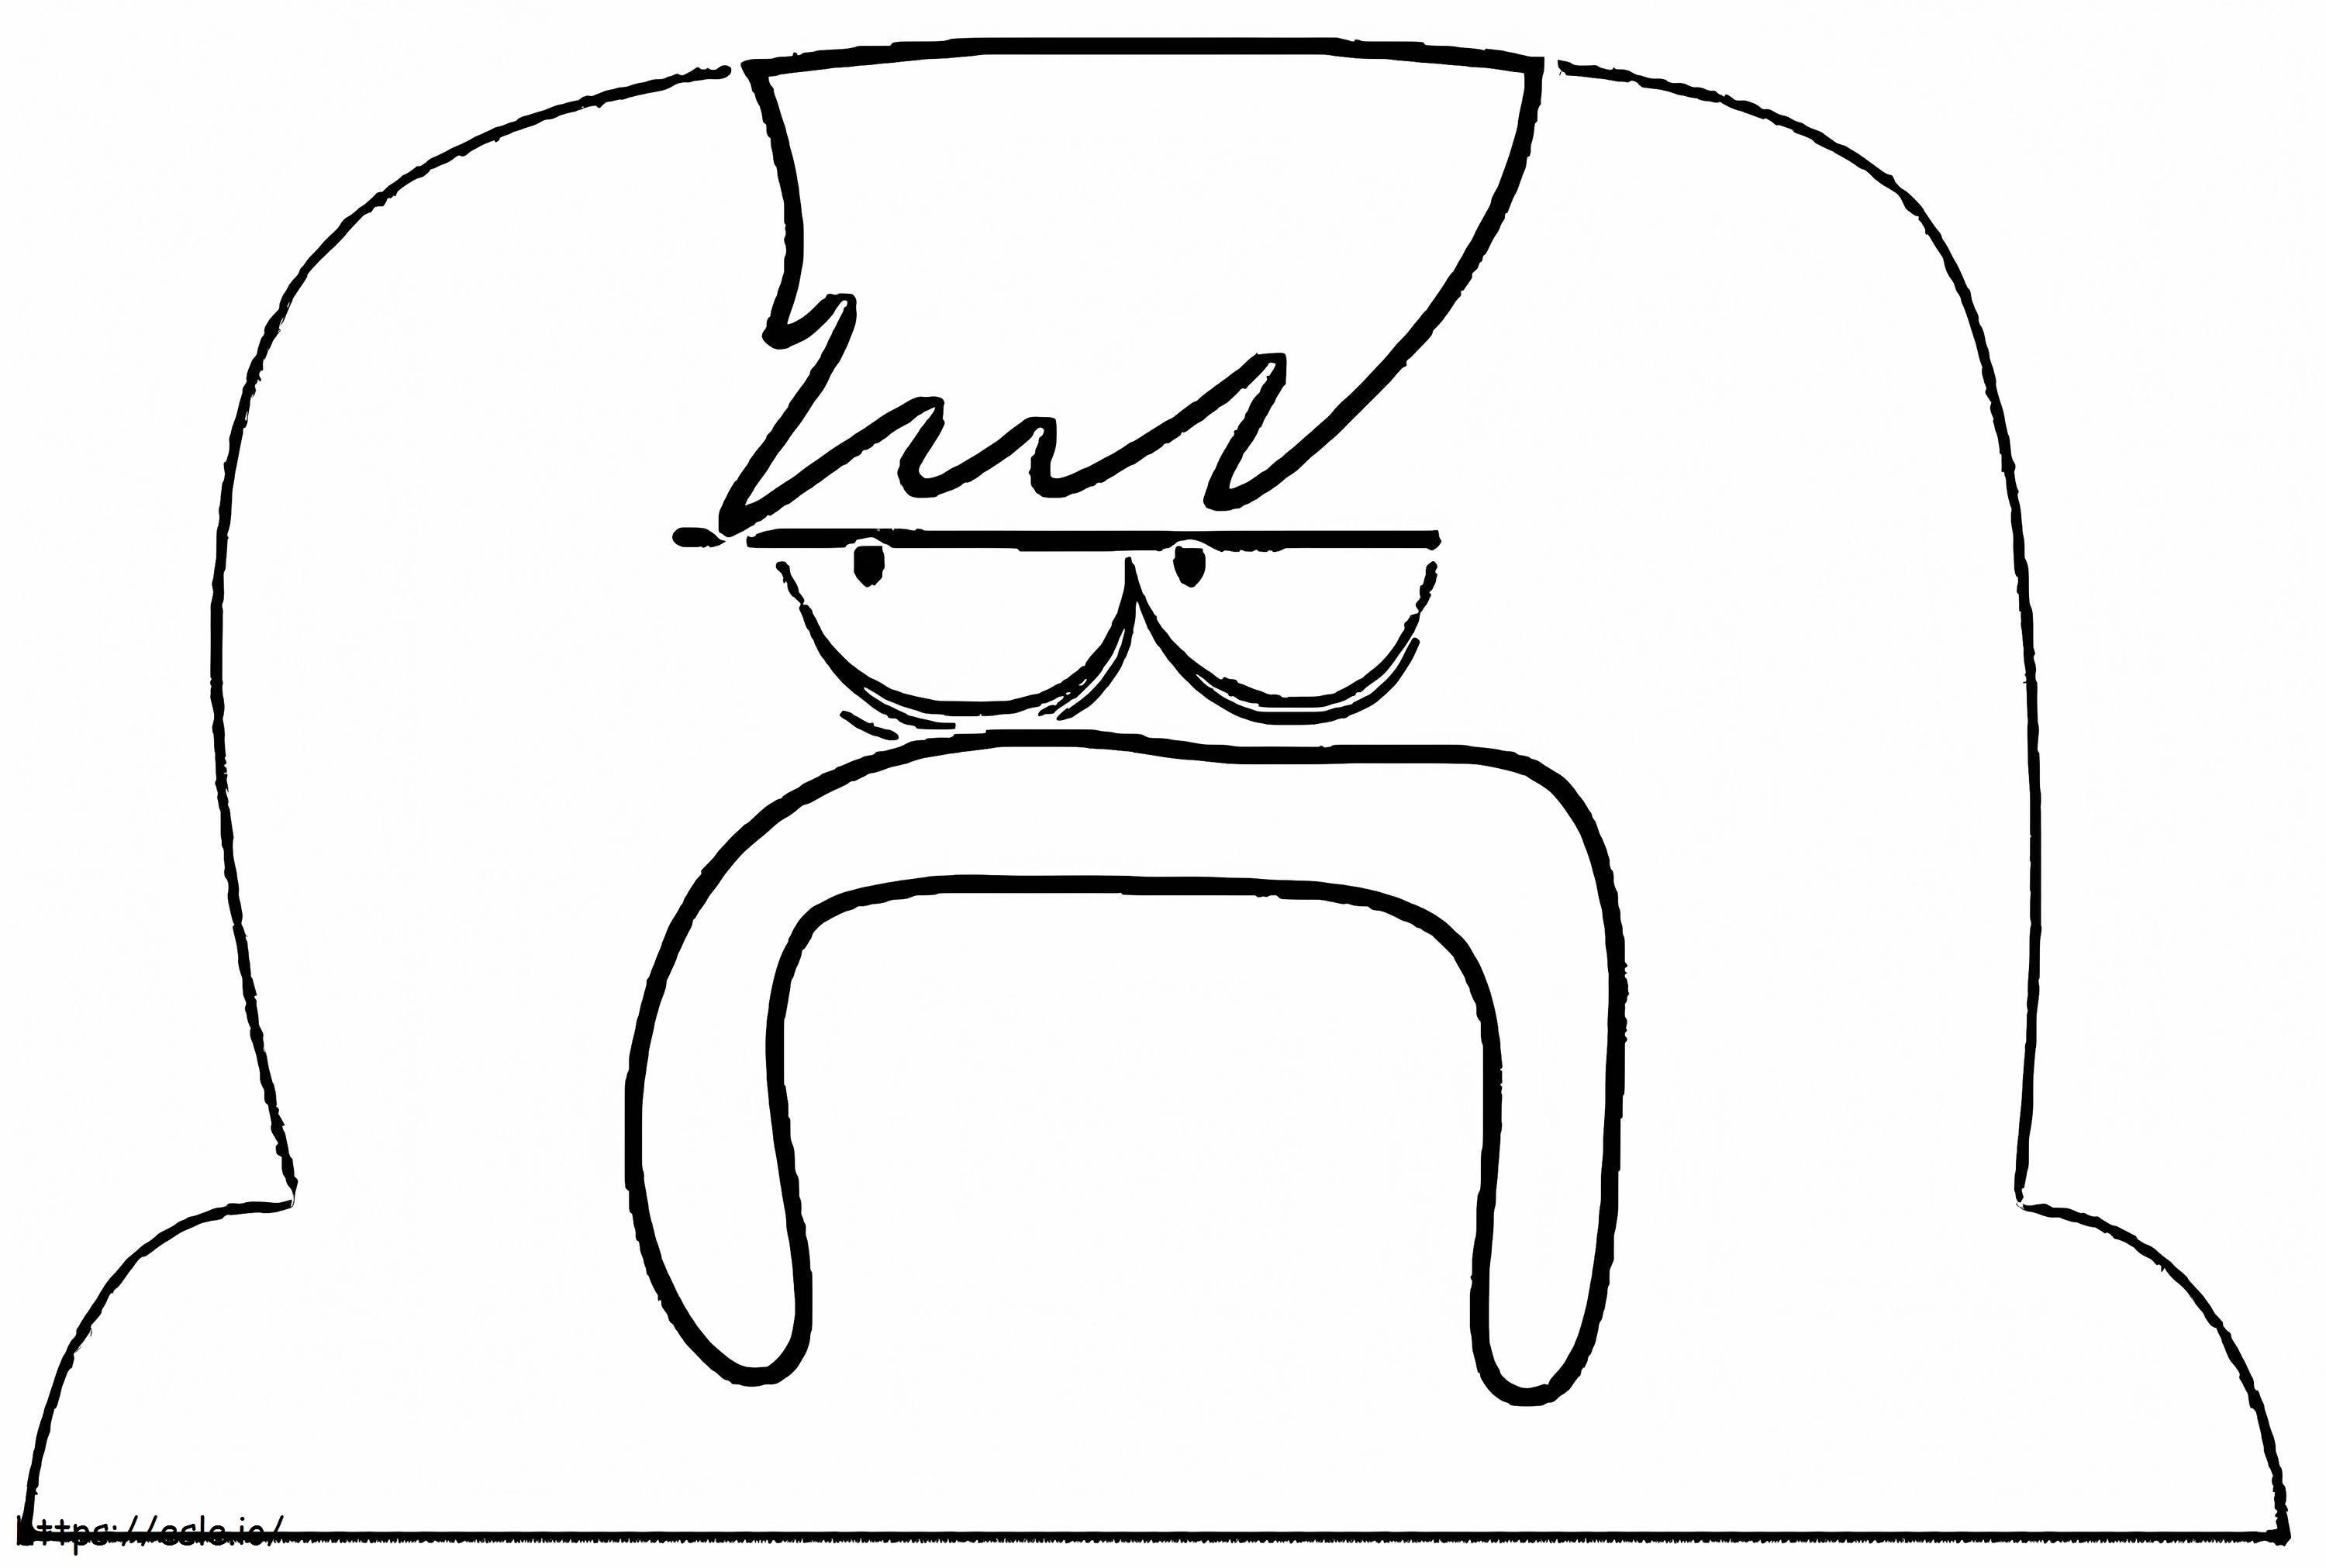 Mr. Moustache From Lamput coloring page